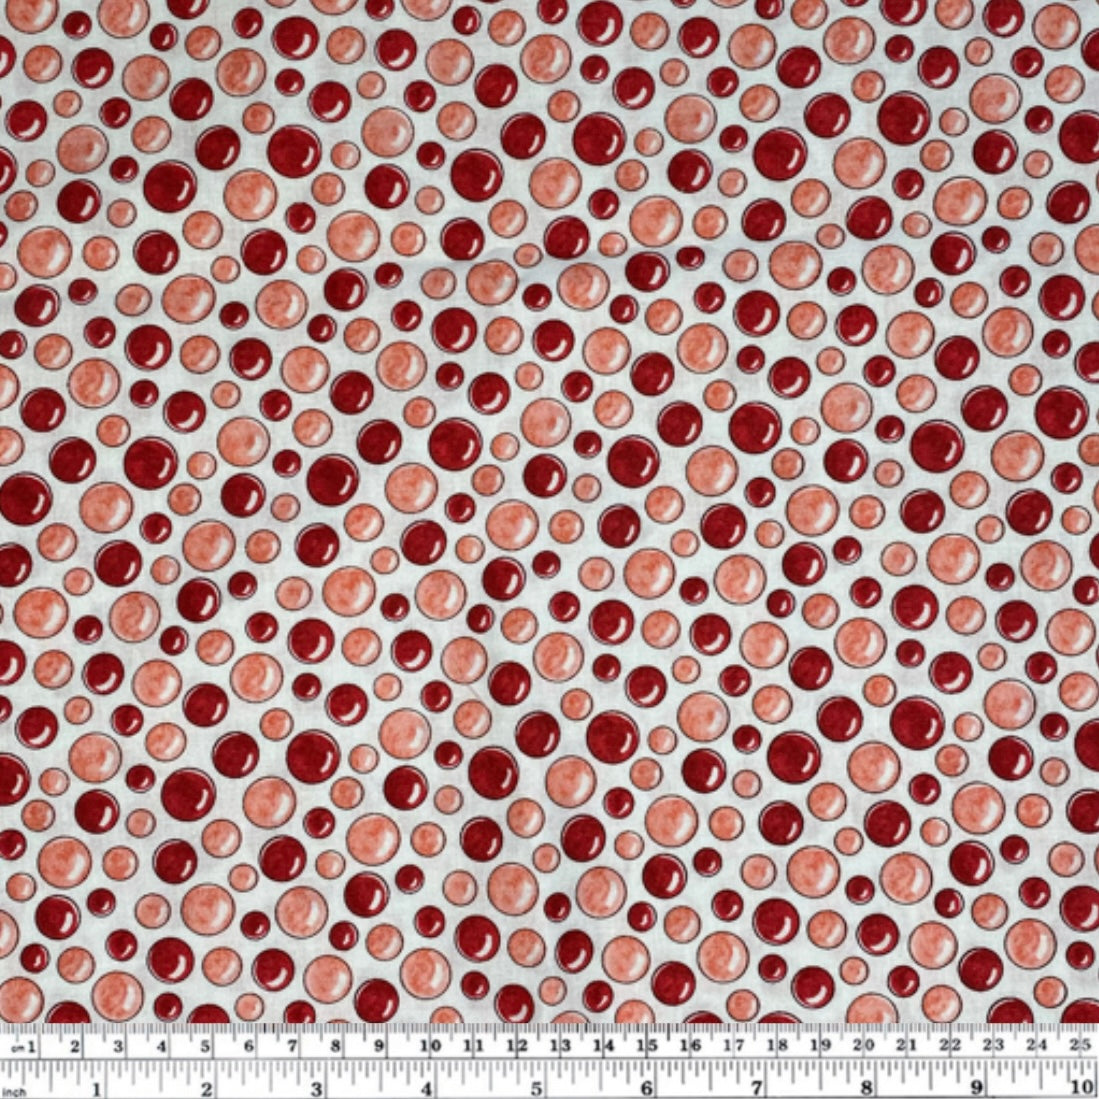 Quilting Cotton - Bubbles - 44” - White/Red/Pink